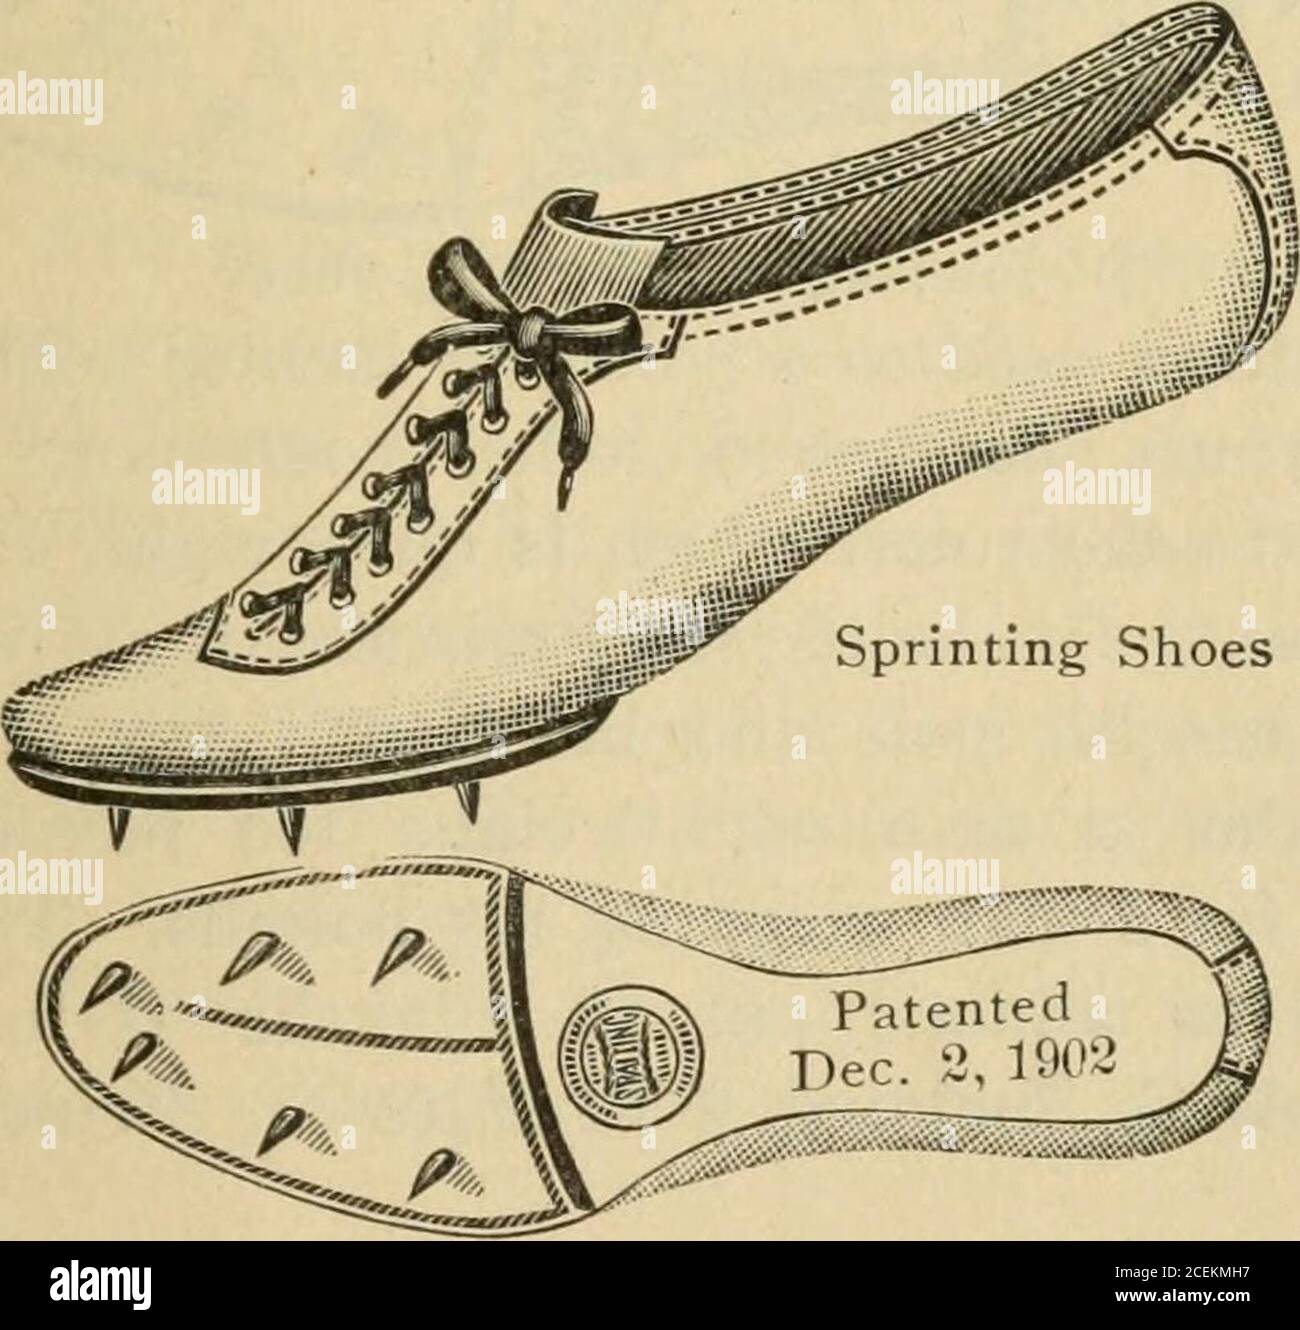 . Spalding's official athletic almanac. Cross Country Shoes all the prominent cross country runners, cost $5.00 per pair. Asprinter will require a pair of sprinting shoes. No. O, that retailfor $5.00. It was with this style shoe that Wefers made all hisrecords. John Cregan, the Inter-collegiate Champion, wore them, as well as CharlesKilpatrick, the peerlesshalf-mile runner andcelebrated record hold-er, and Arthur J. Duffey,who has gone the 100yards in 93-5 seconds.The sweater. No. A, offinest Australian lambswool, was made original-ly by special order forthe Yale foot ball team. SPALDINGS OFFI Stock Photo